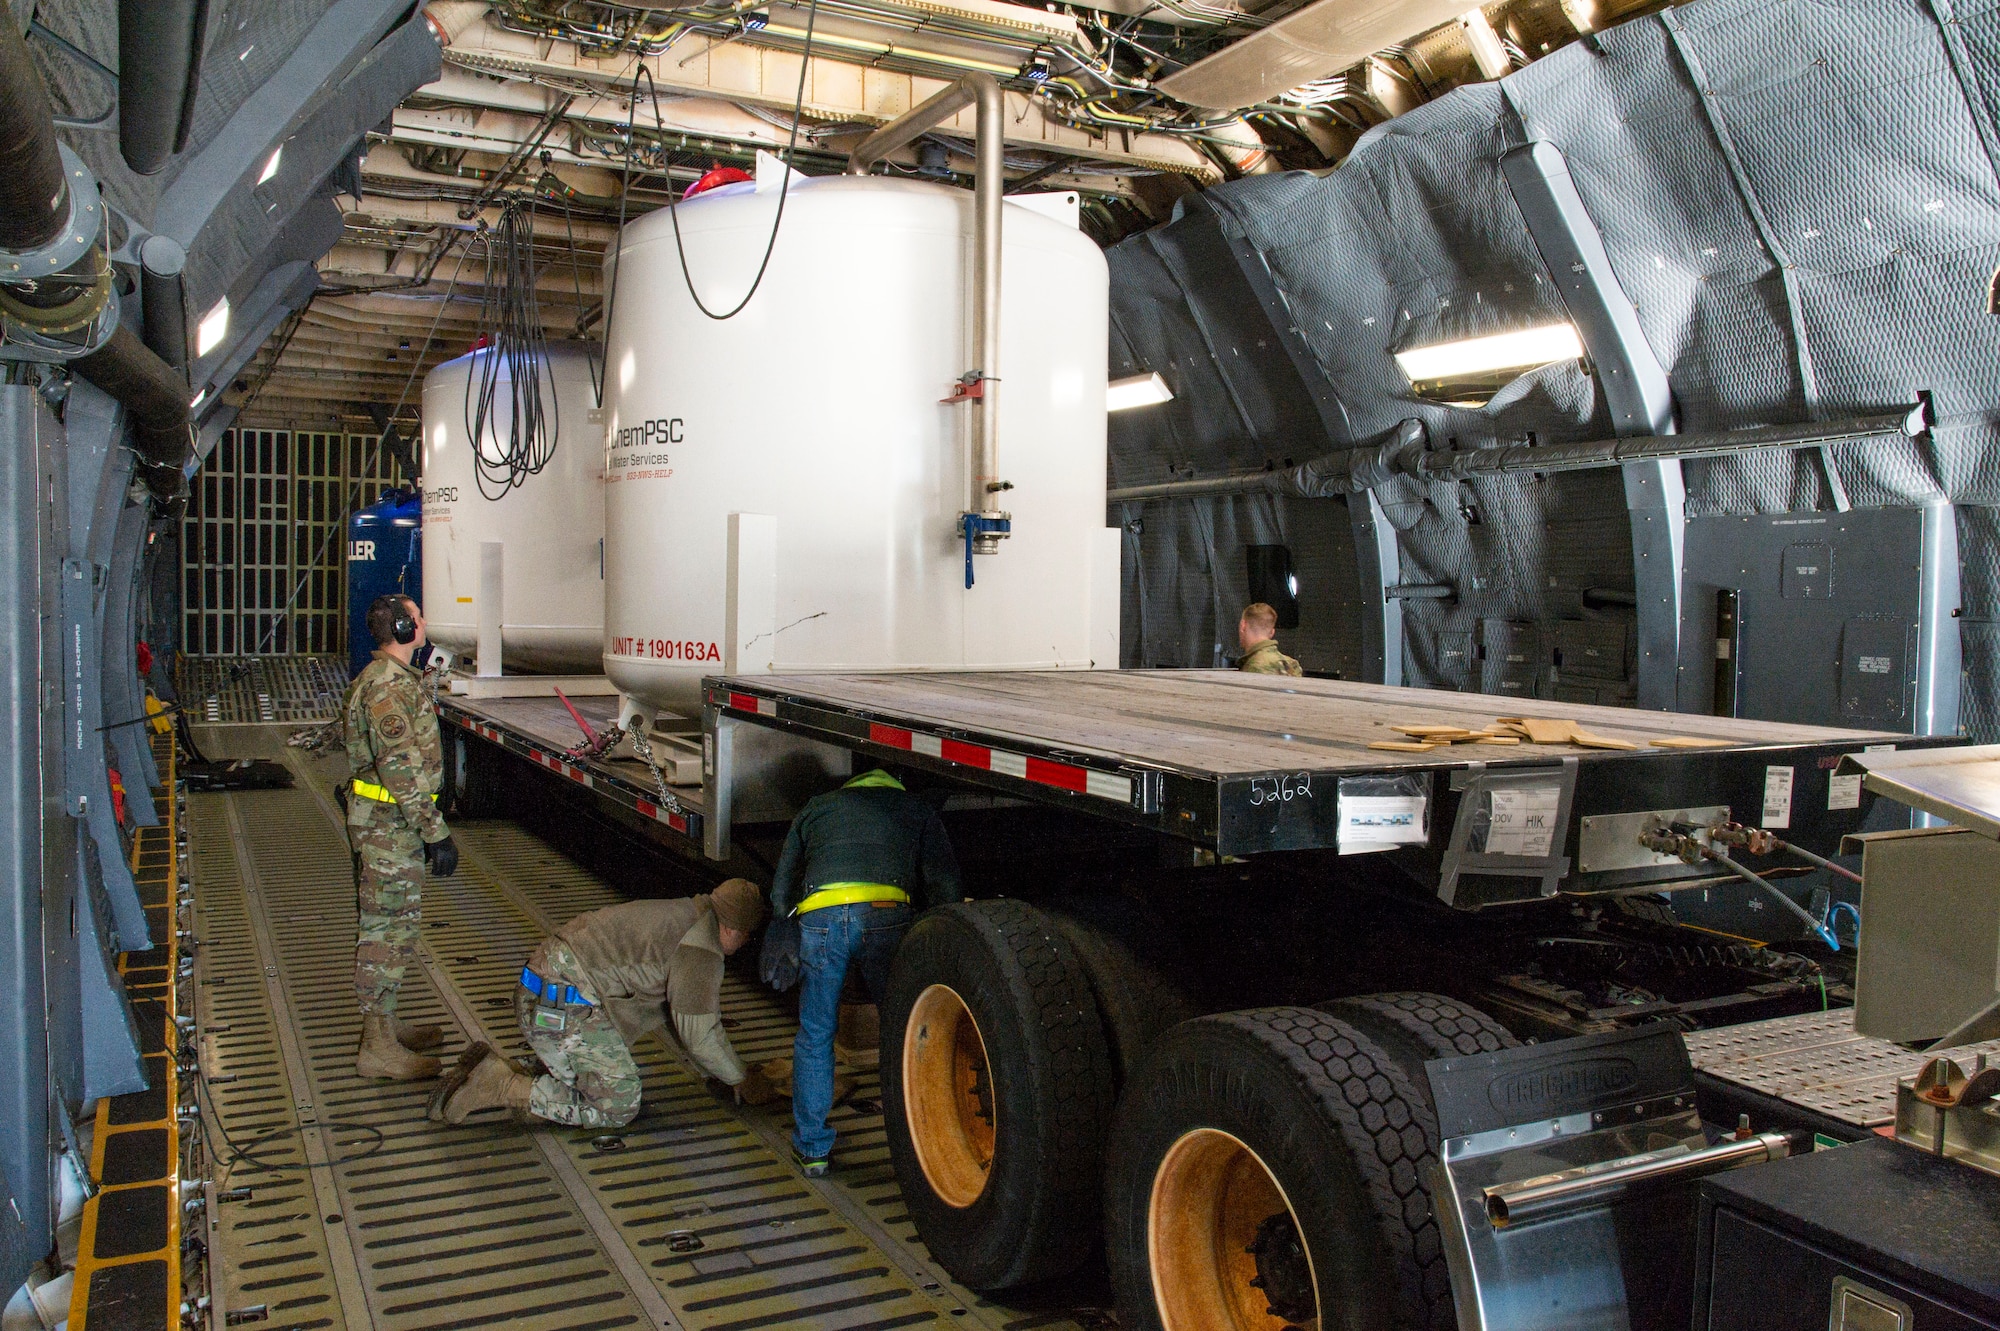 A 436th Aerial Port Squadron ramp services load team secures a trailer loaded with water filtration equipment at Dover Air Force Base, Delaware, Dec. 20, 2021. A C-5M Super Galaxy aircrew assigned to the 9th Airlift Squadron, flew the equipment to Joint Base Pearl Harbor-Hickam (JBPHH), Hawaii. The JBPHH water quality recovery is a joint U.S. military initiative working closely with the State of Hawaii, Department of Health, Honolulu Board of Water Supply, U.S. government and independent organizations to restore a safe water delivery system to JBPHH military housing communities through testing, treatment, and repair. For detailed information, including available resources and locations, and news, go to www.navy.mil/jointbasewater.   (U.S. Air Force photo by Roland Balik) (This photo has been altered for security purposes by blurring out identification badges.)